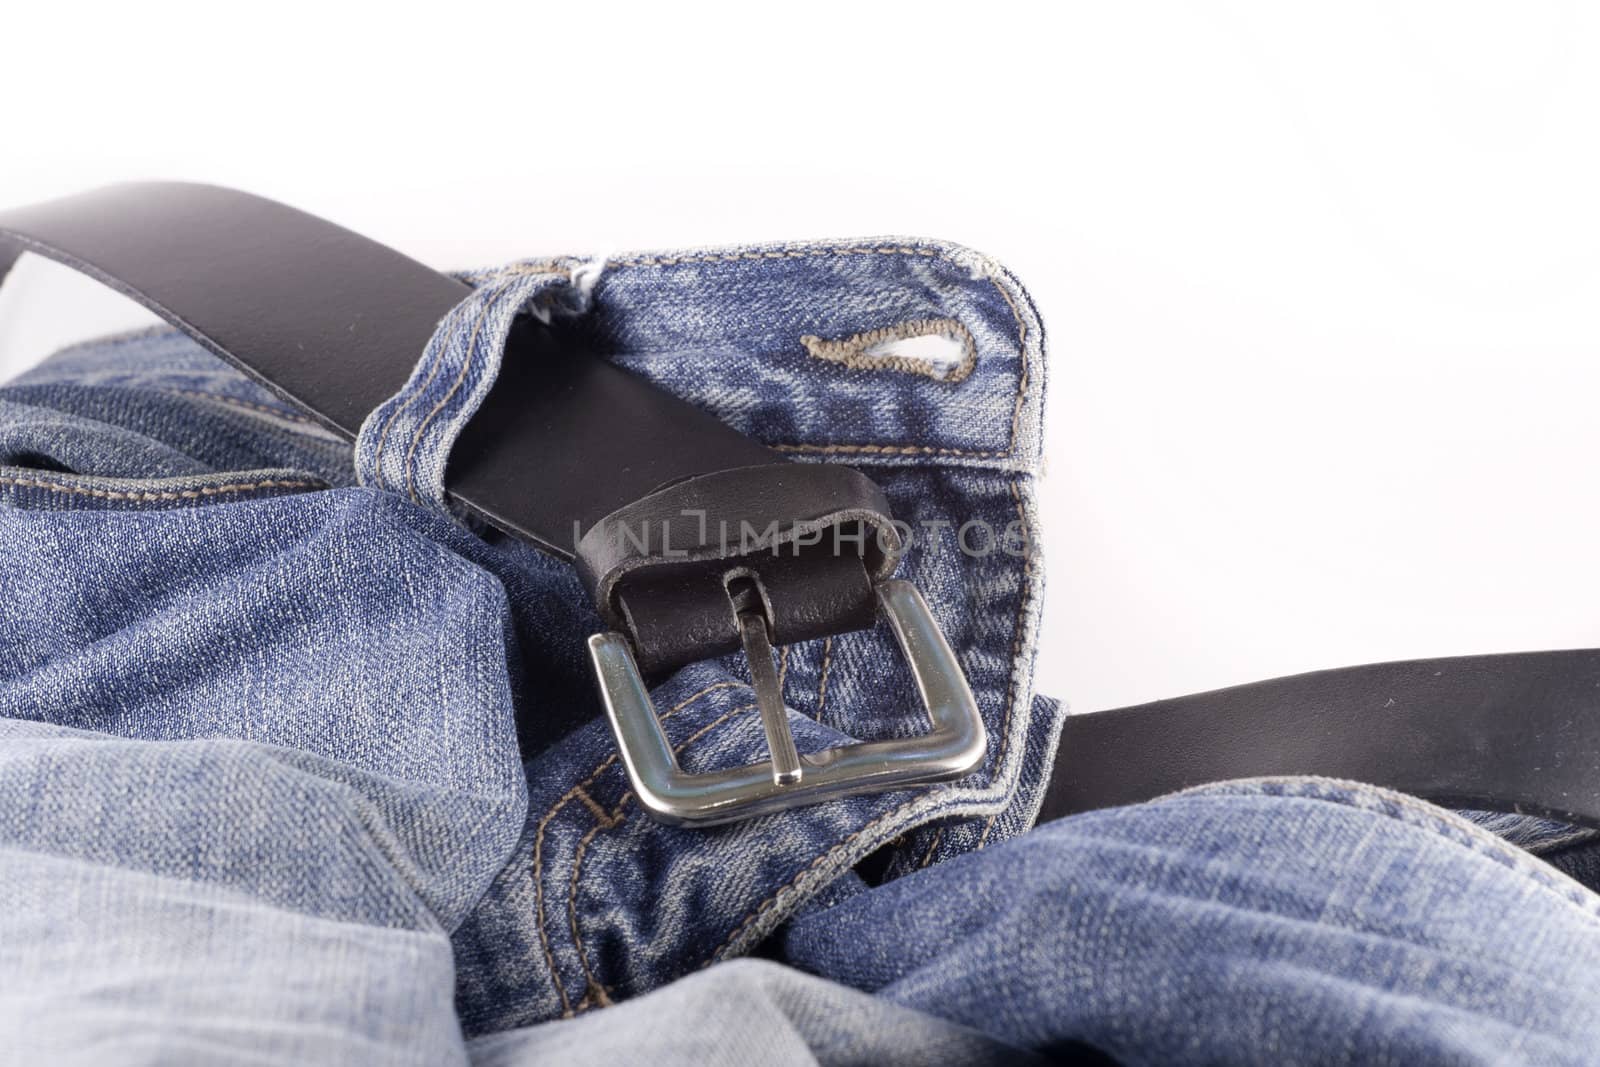 Blue jeans and a black leather belt by Lizard